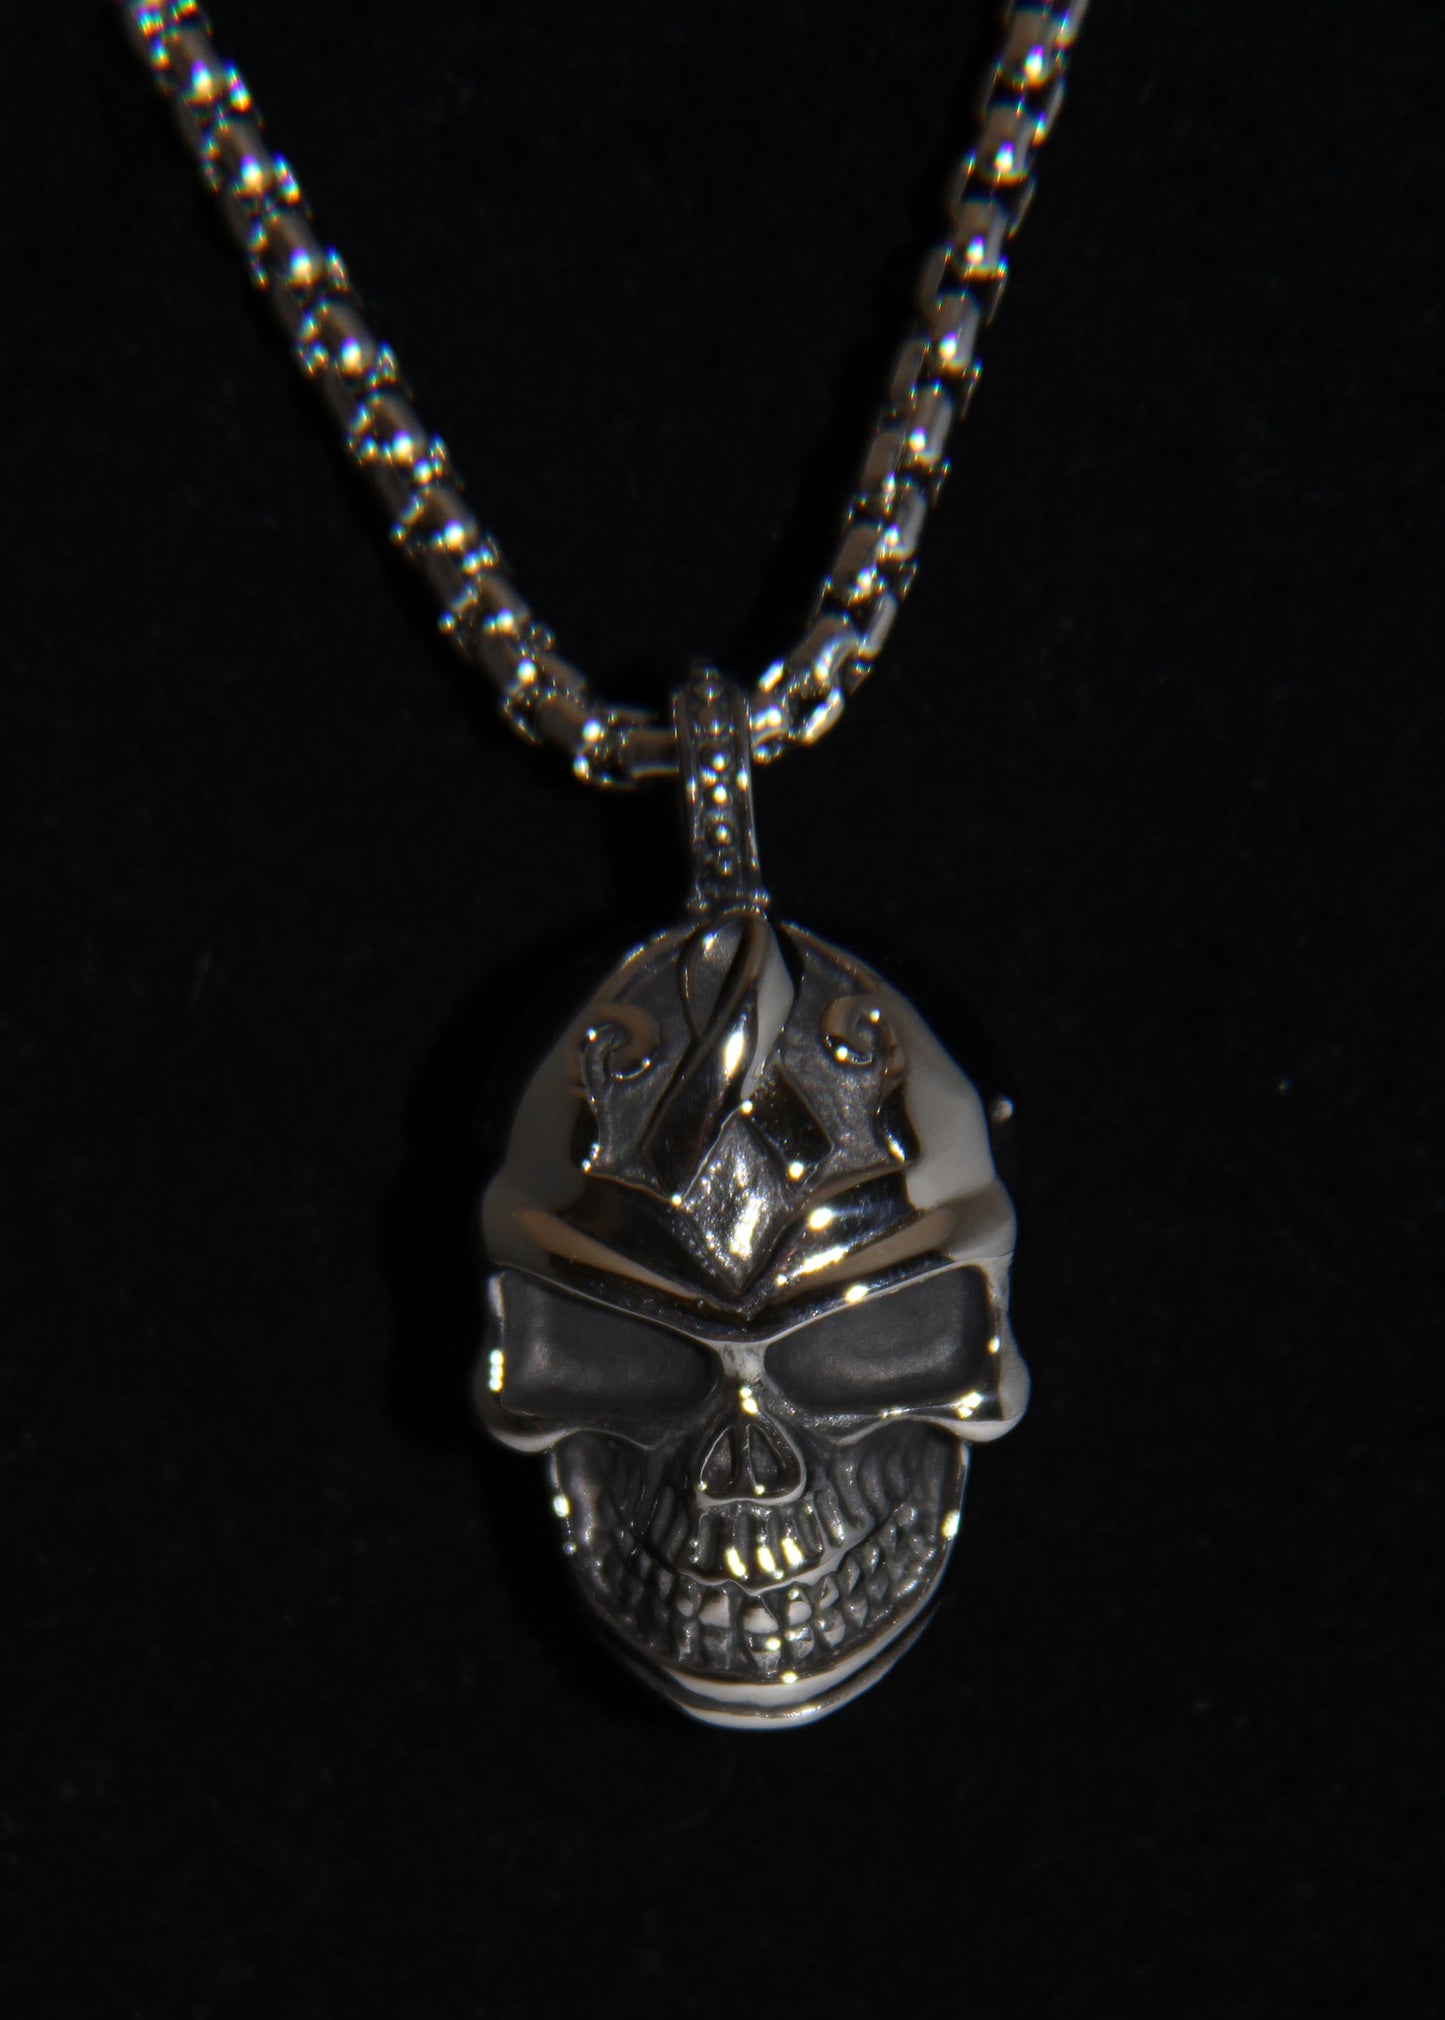 Stainless Steel Small Skull with Ribbon Pendant- UDINC0471